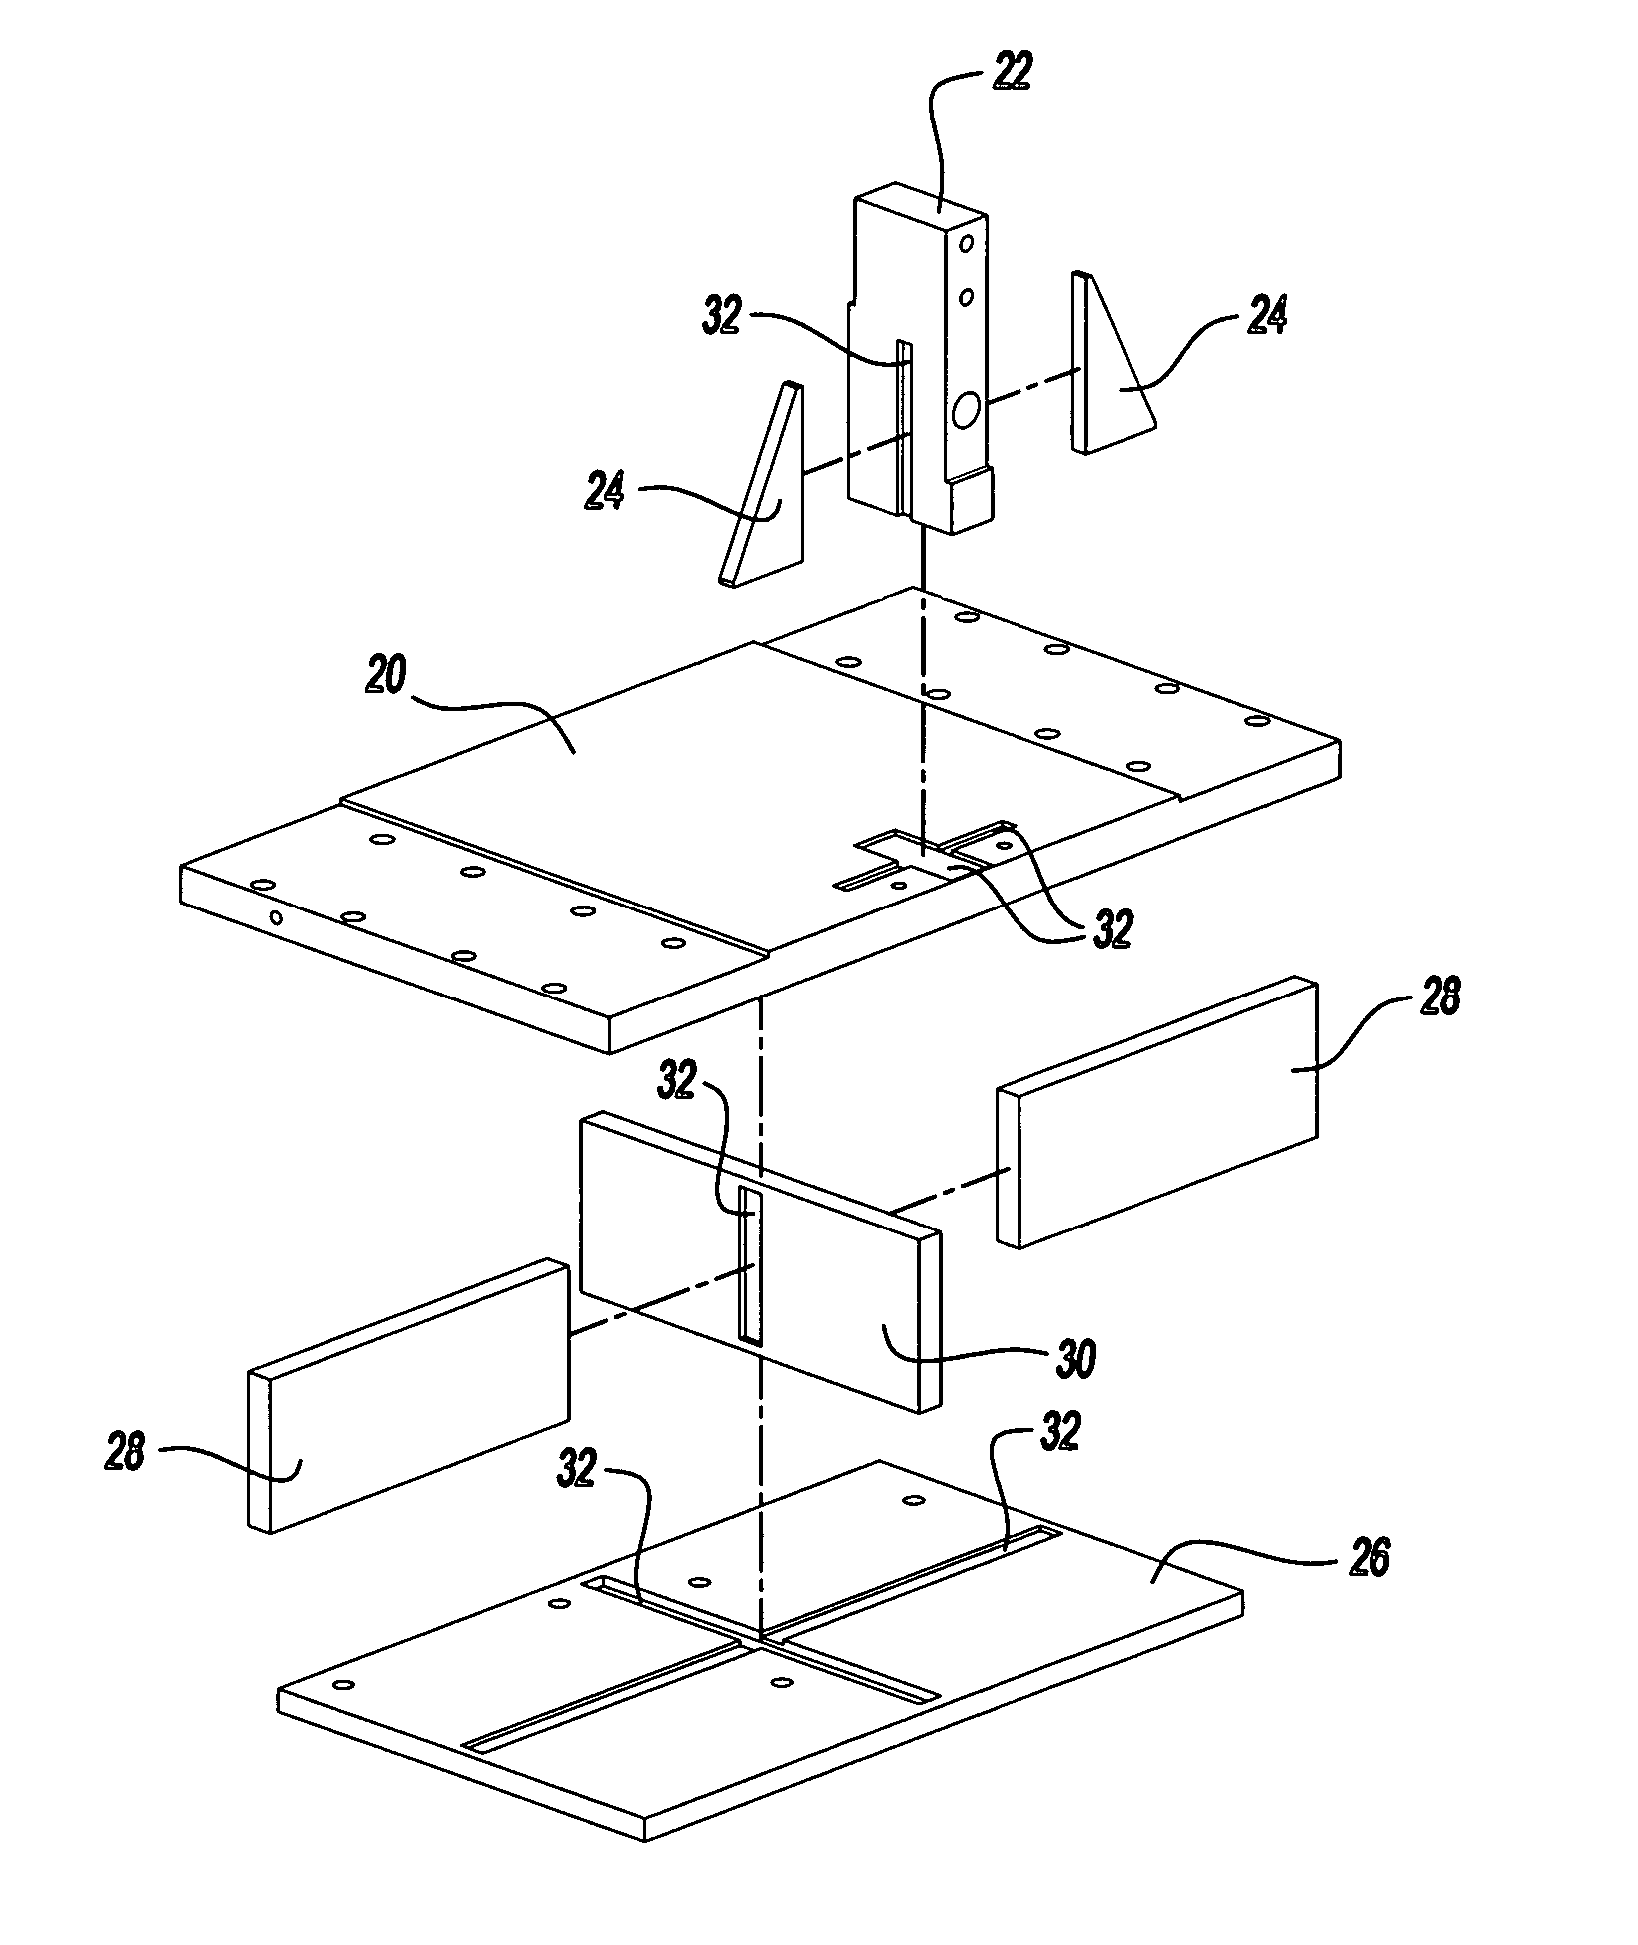 Computer programed method of forming and fabricating parts into an assembly